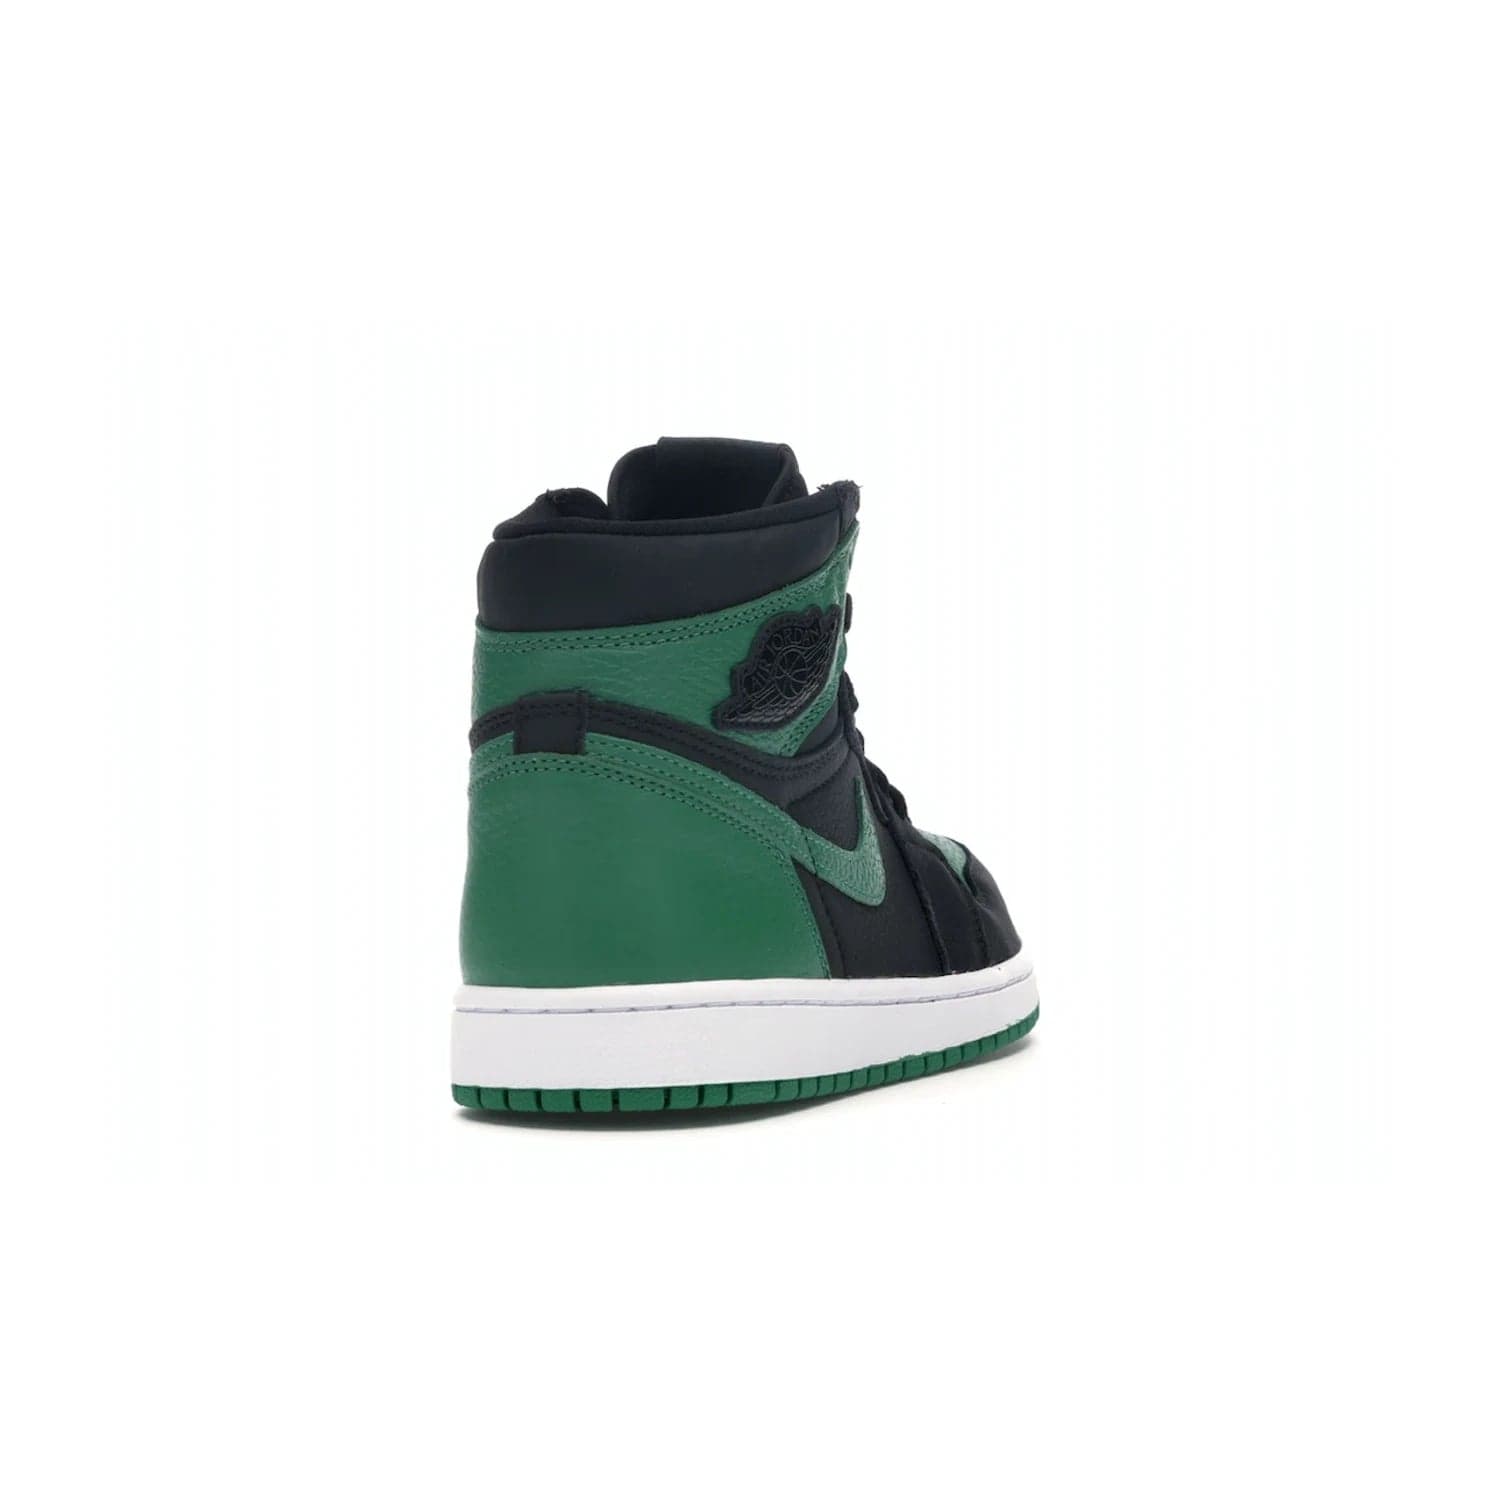 Jordan 1 Retro High Pine Green Black - Image 30 - Only at www.BallersClubKickz.com - Step into fresh style with the Jordan 1 Retro High Pine Green Black. Combining a black tumbled leather upper with green leather overlays, this sneaker features a Gym Red embroidered tongue tag, sail midsole, and pine green outsole for iconic style with a unique twist.